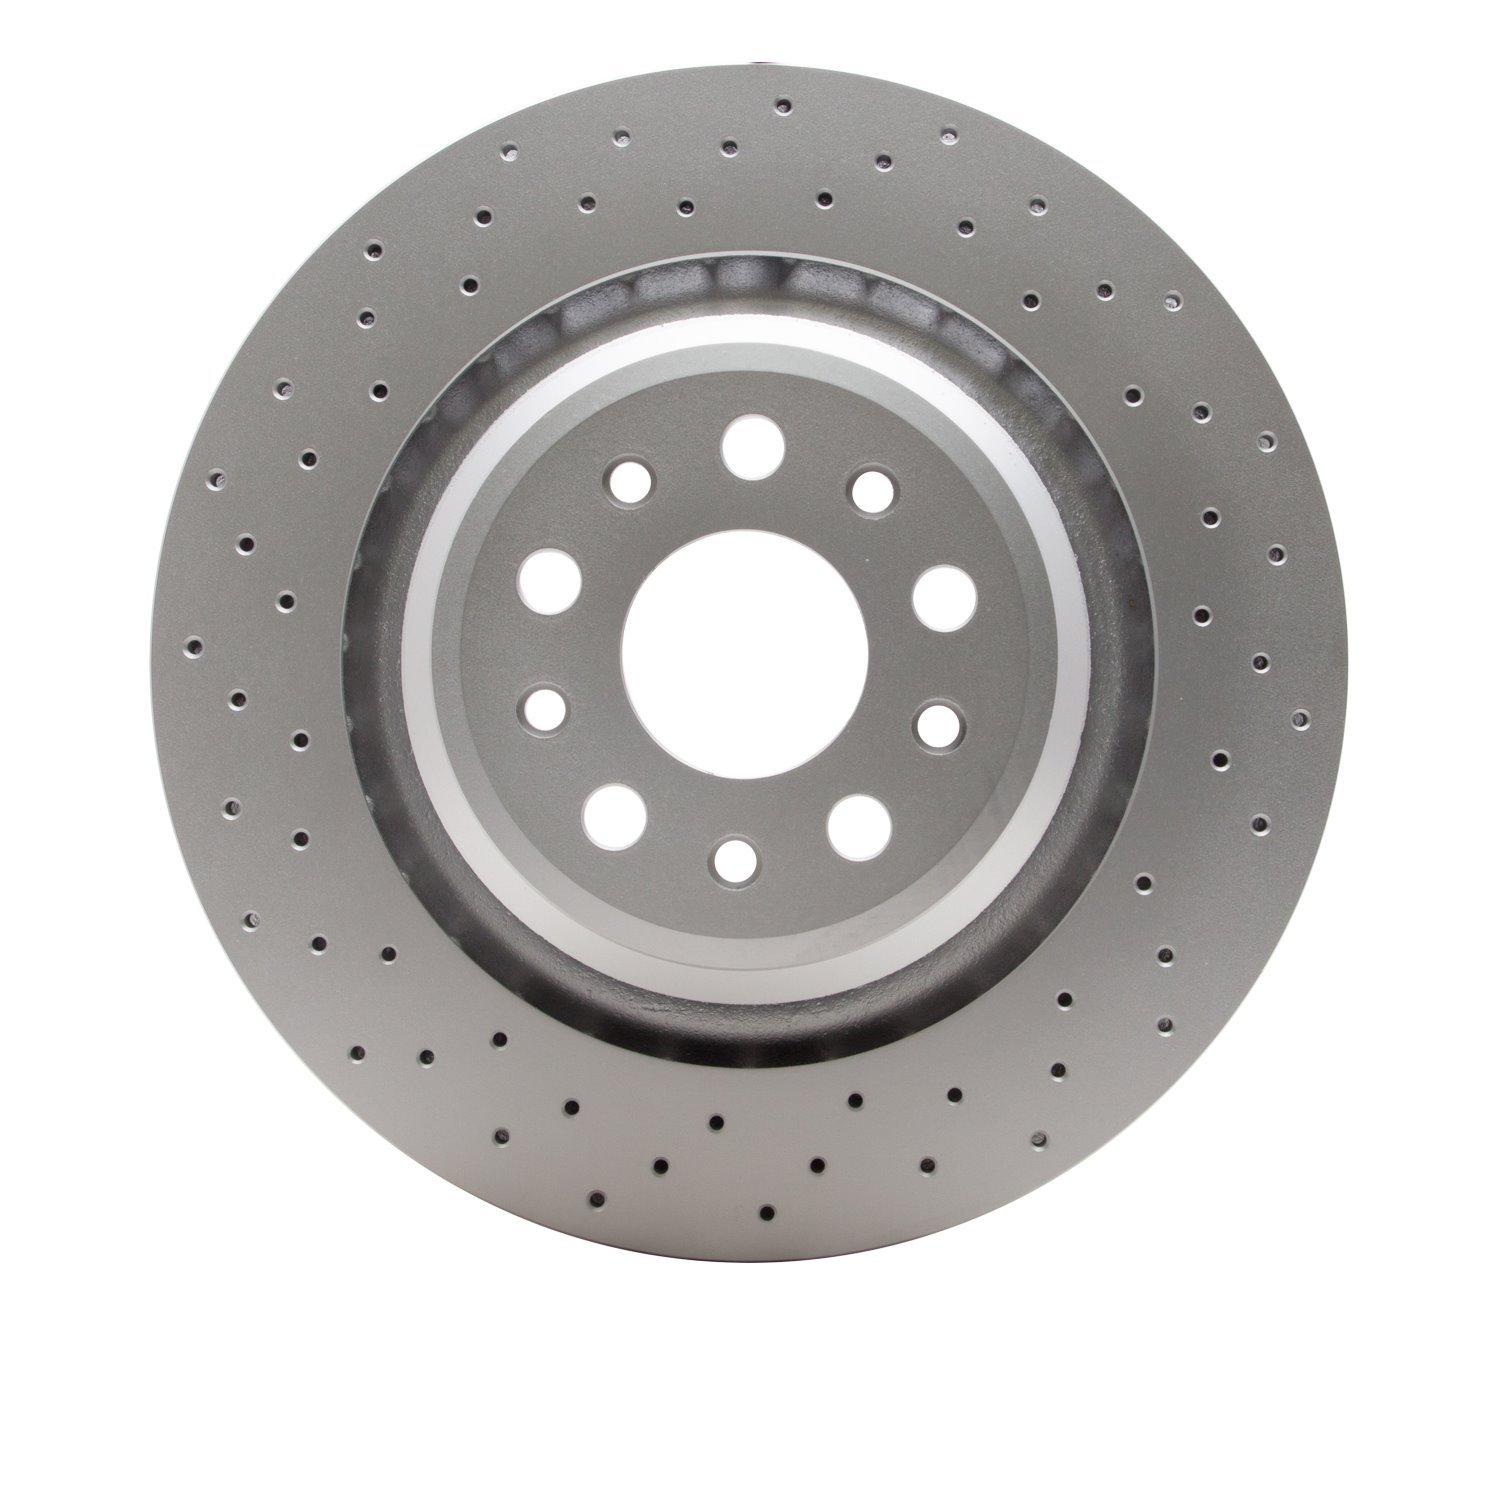 Hi-Carbon Alloy Geomet-Coated Drilled Rotor, 2014-2020 Maserati, Position: Rear